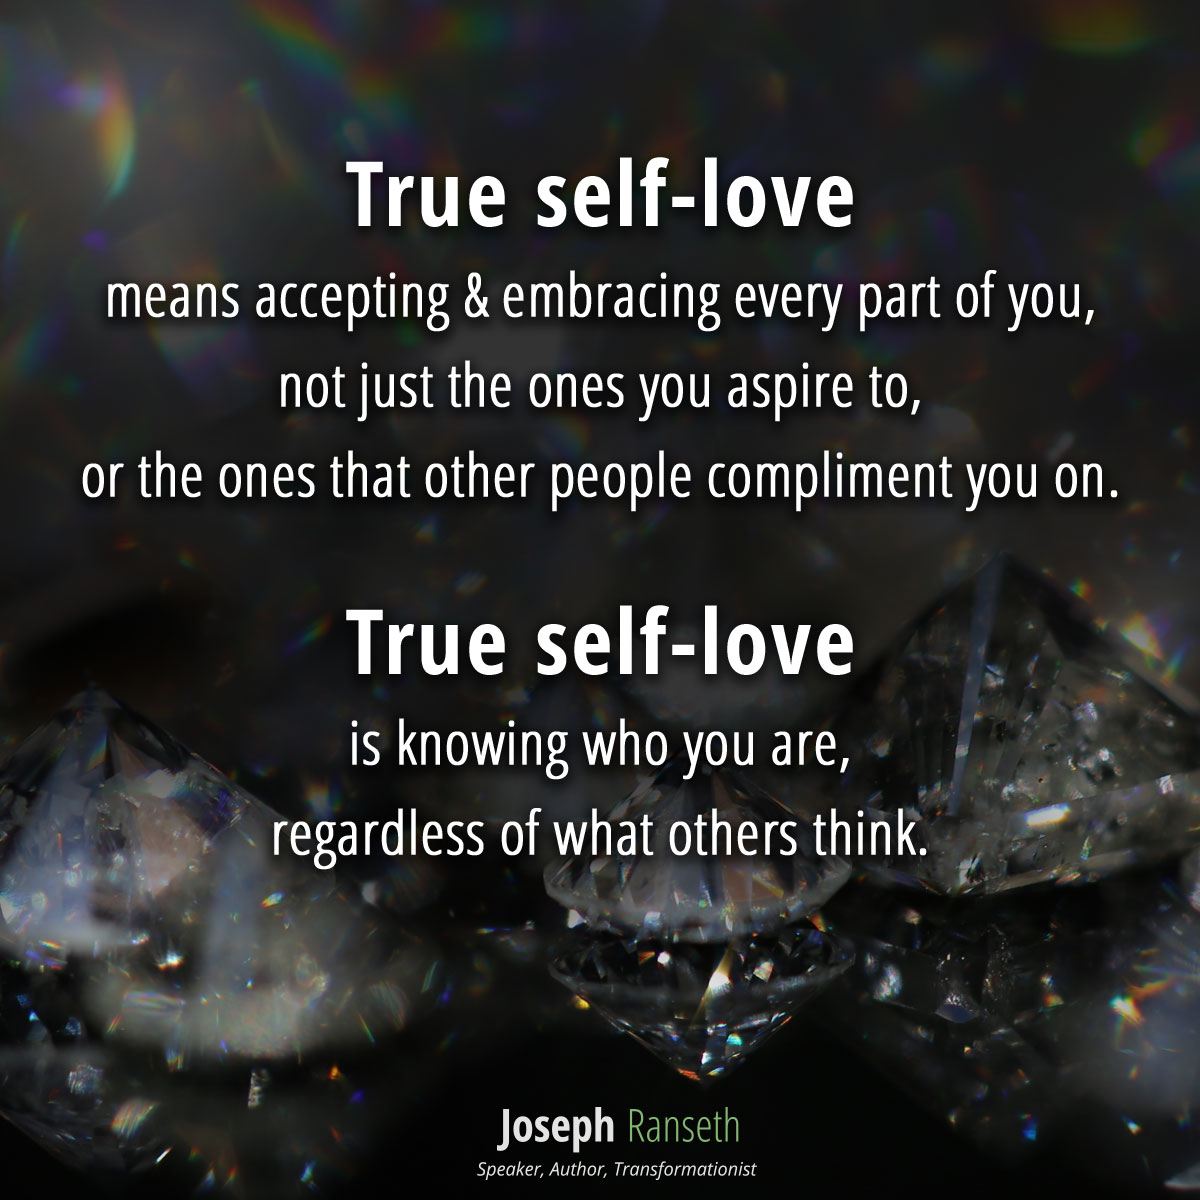 True self-love means accepting & embracing every part of you, not just the ones you aspire to, or the ones that other people compliment you on. True self-love is knowing who you are, regardless of what others think. It is embracing the shadows, as well as the sunshine.